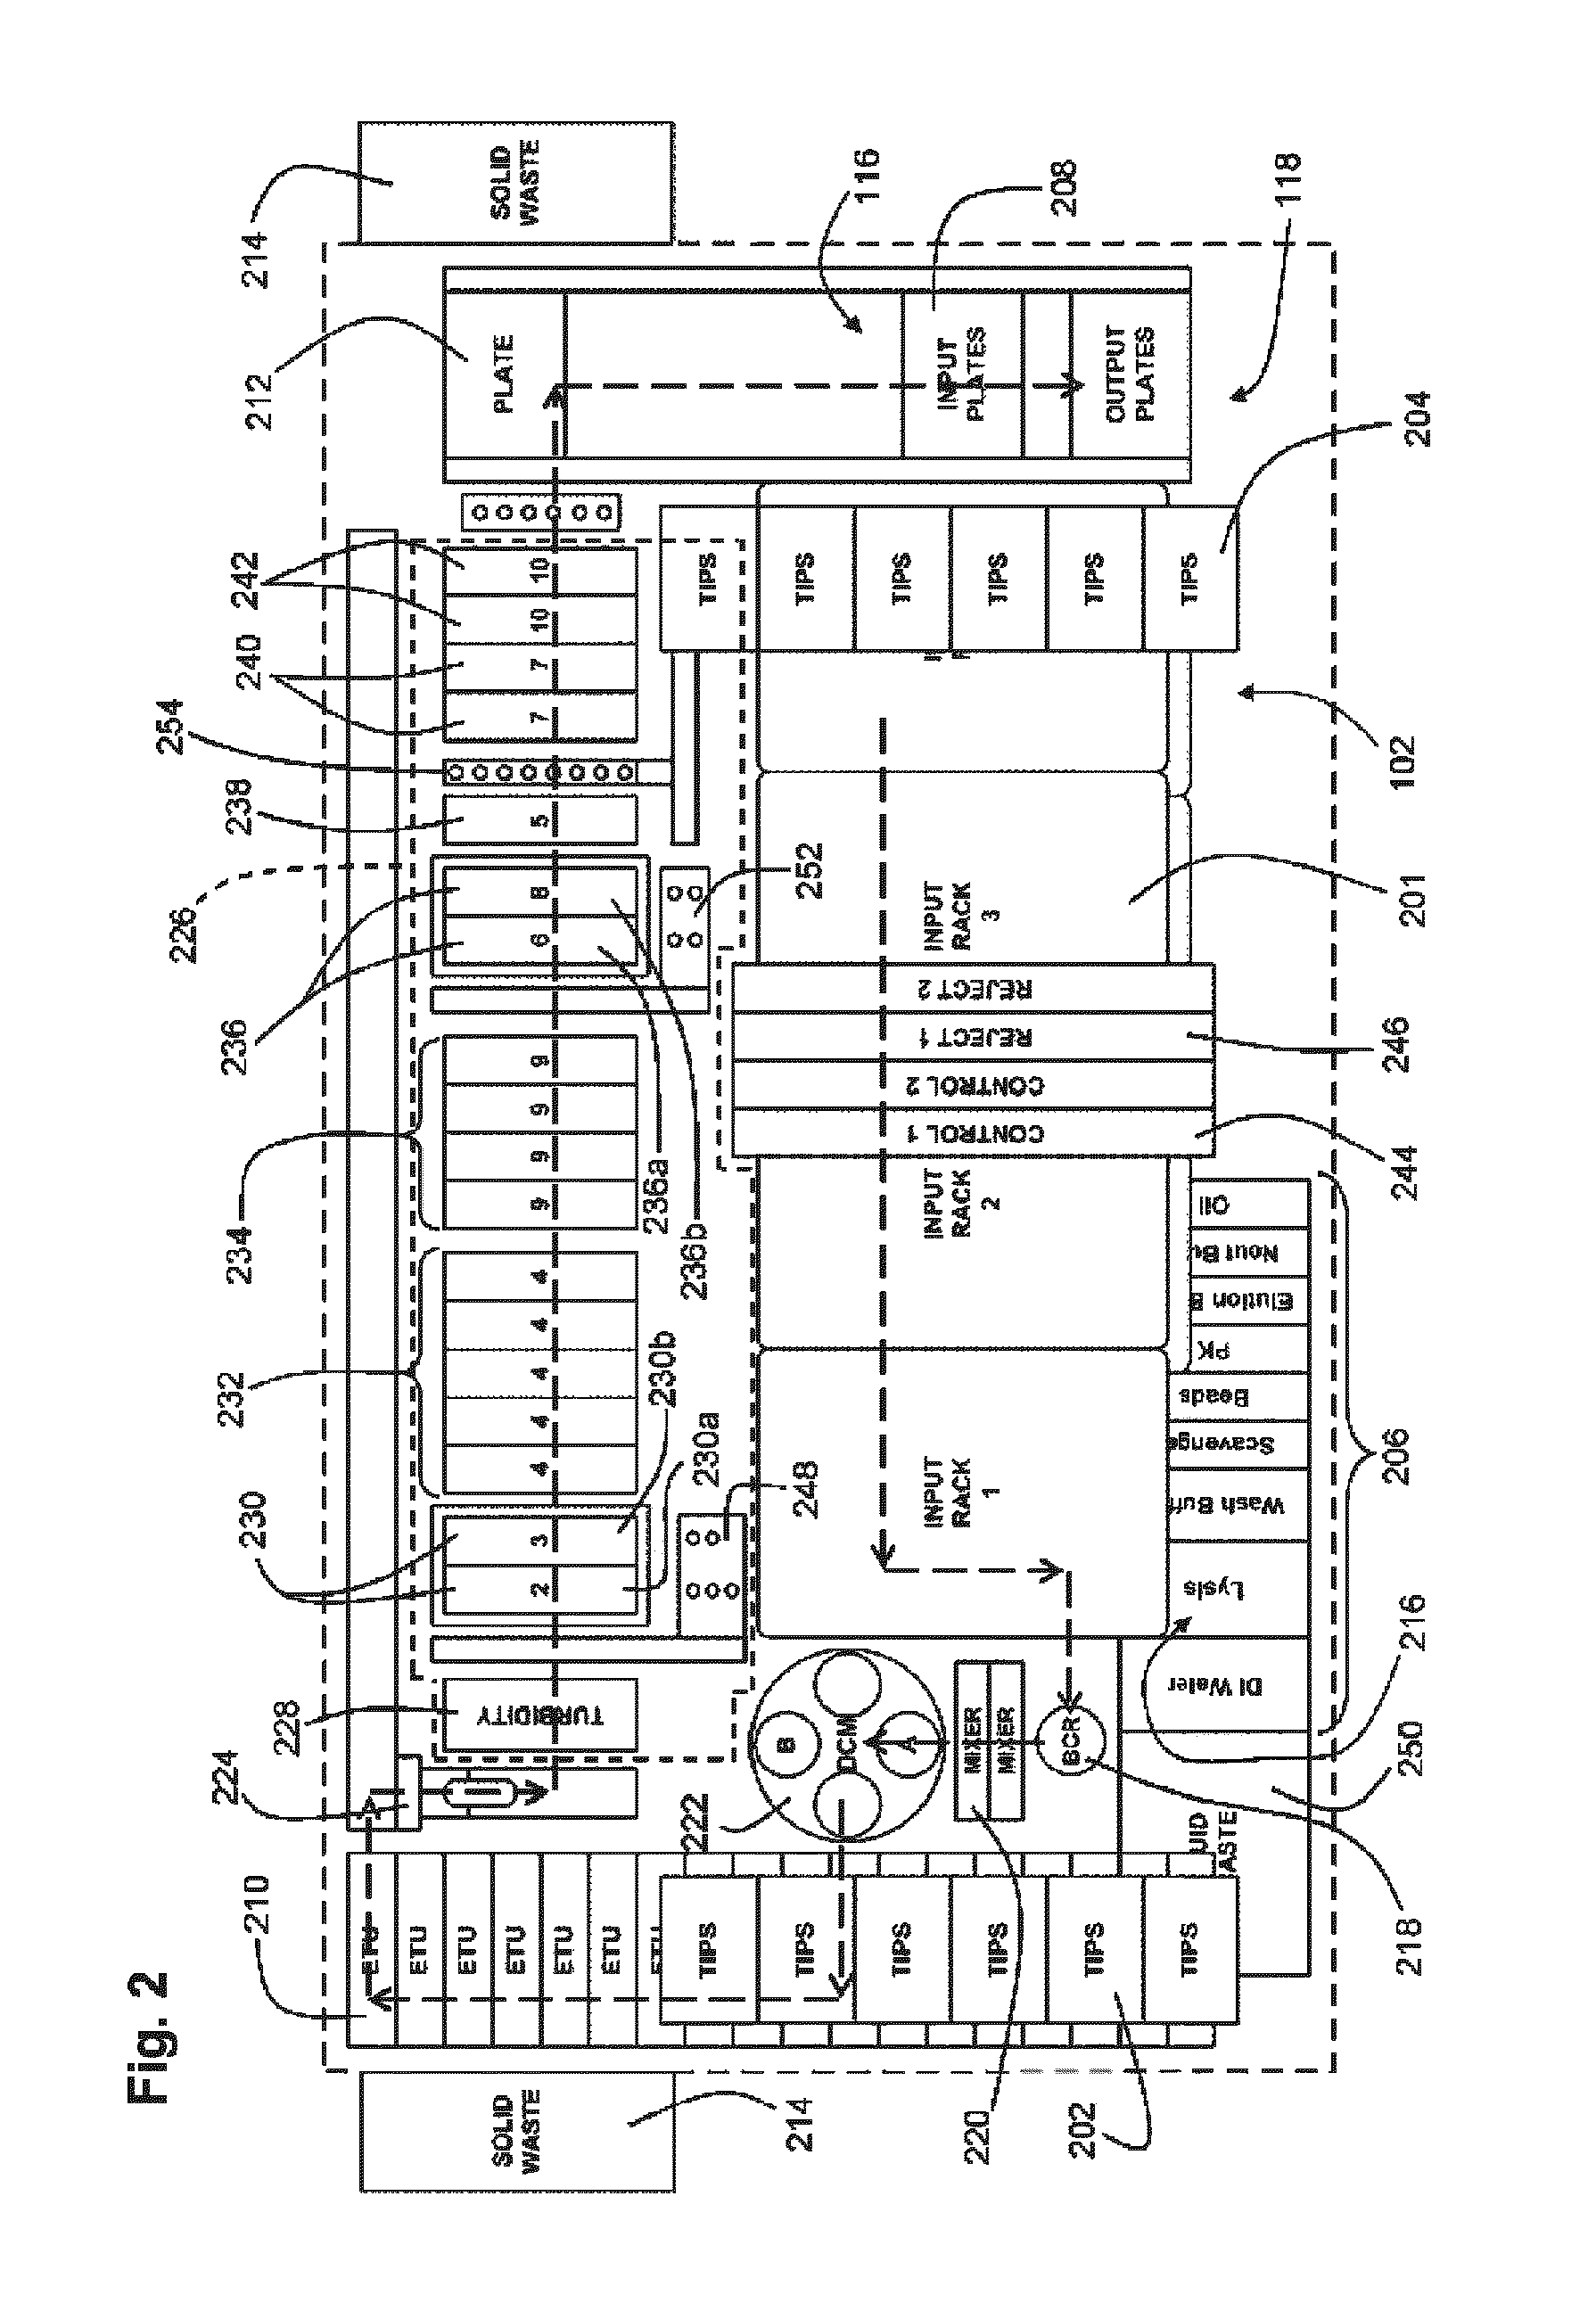 Open platform automated sample processing system